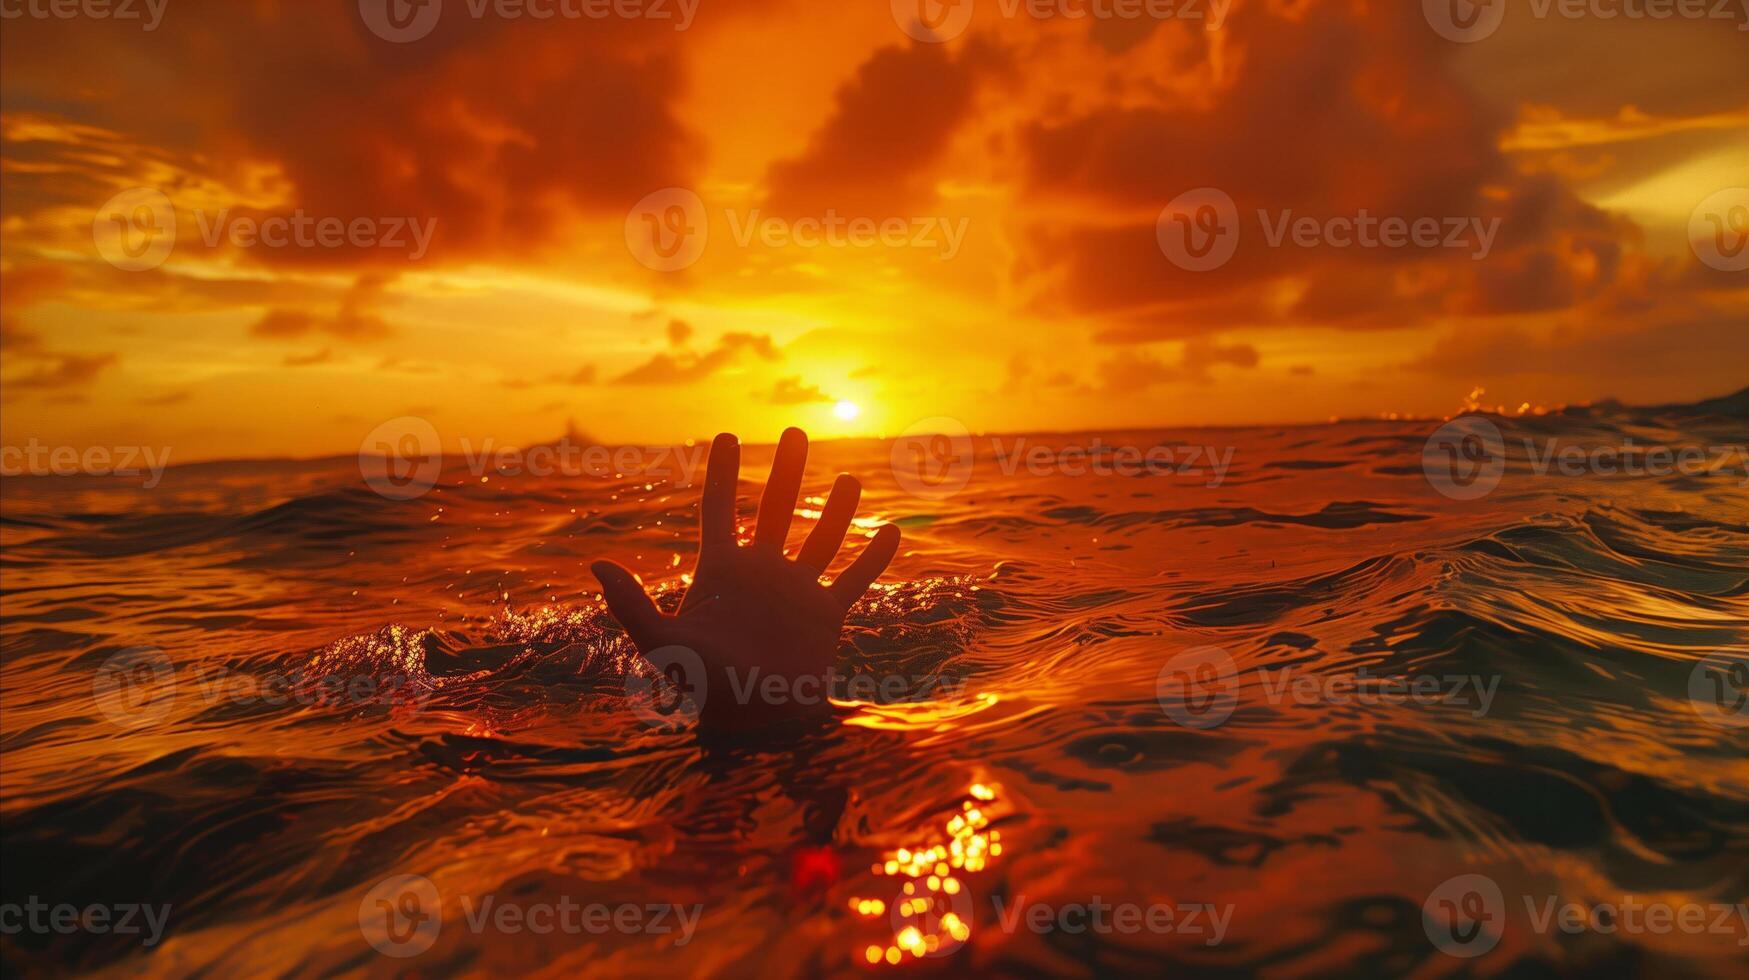 The image of the hand reaching out in the water during sunset indicates drowning and the need for help. photo